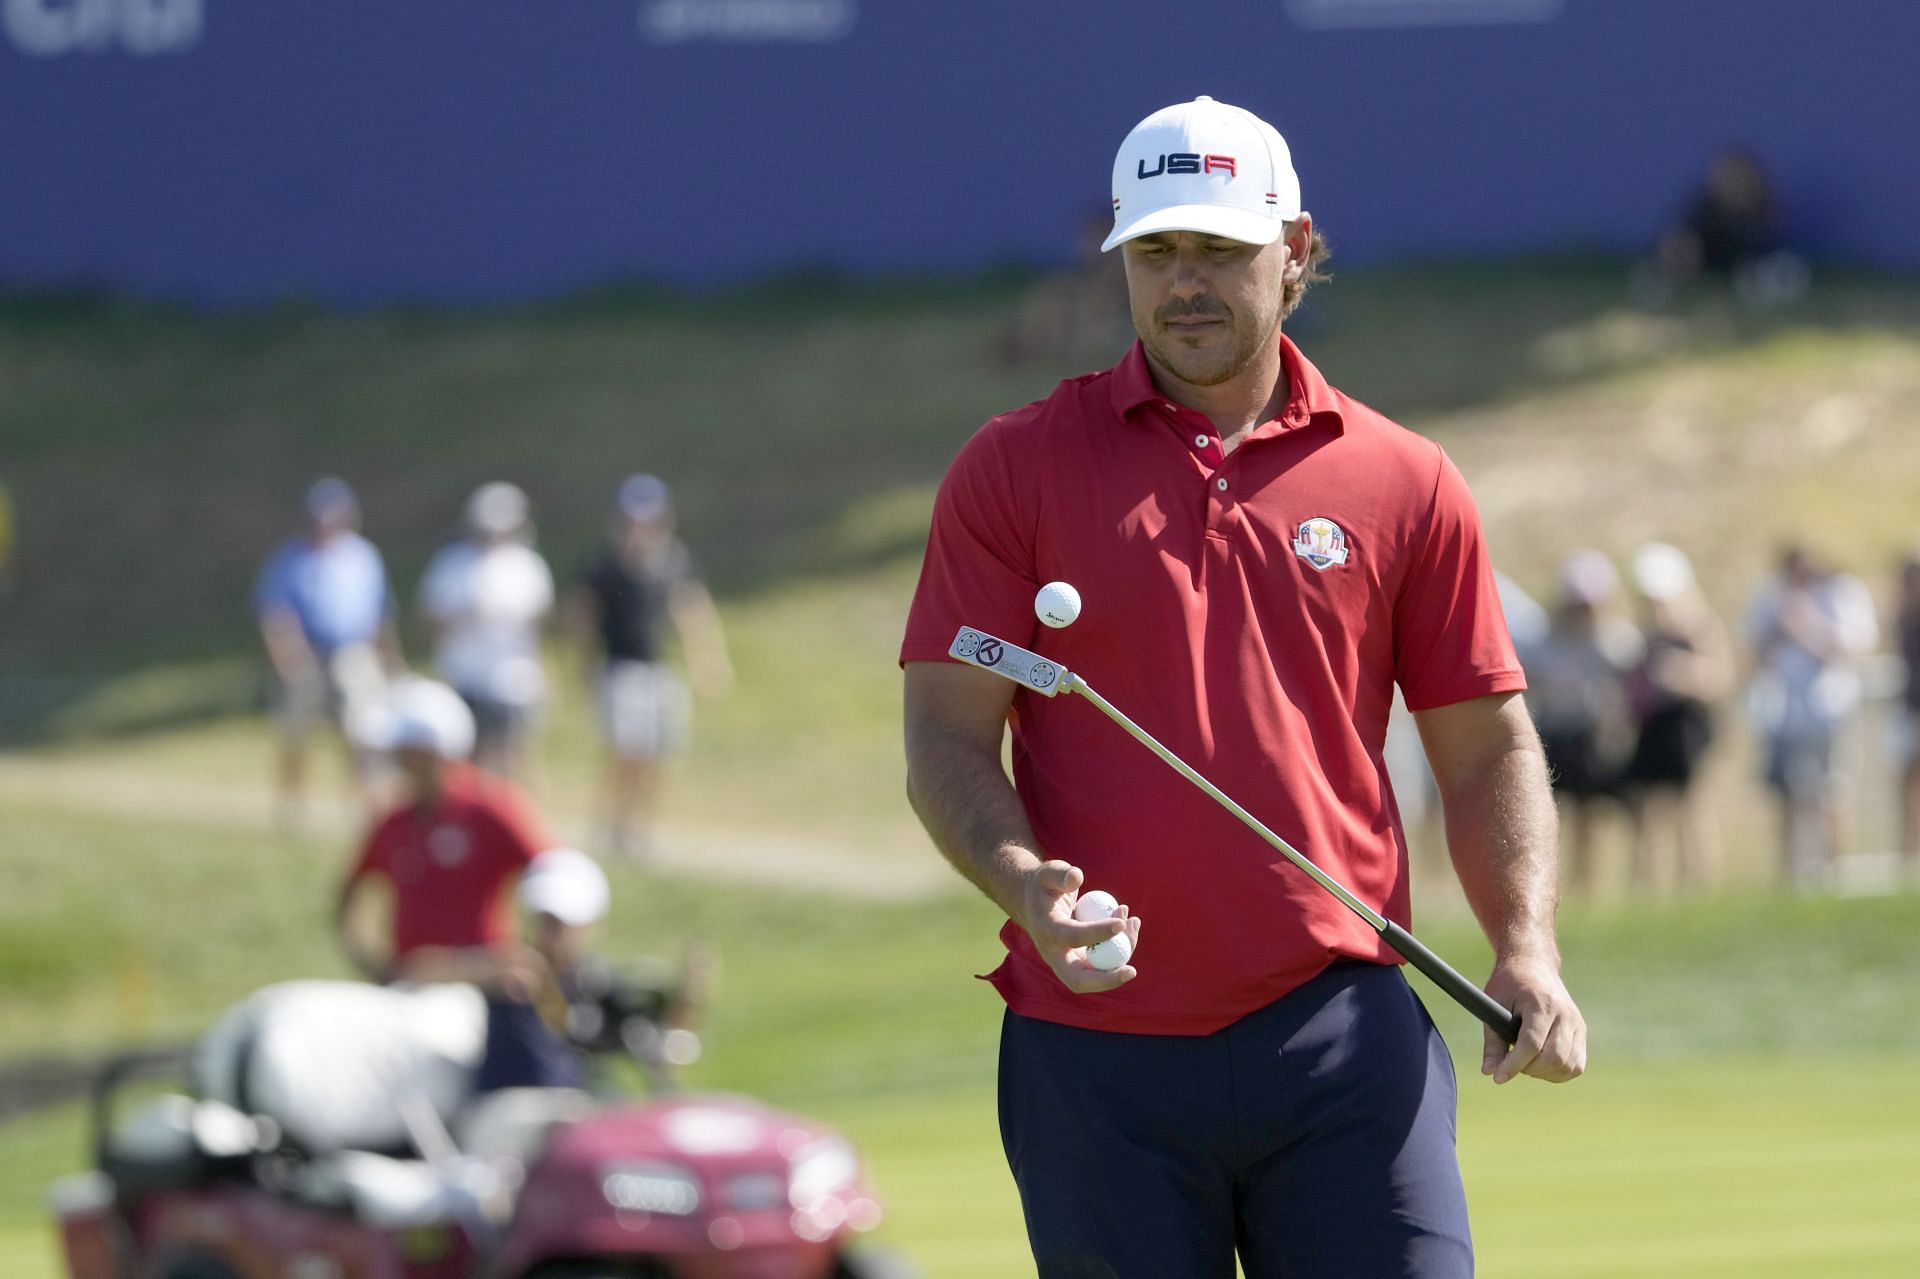 Brooks Koepka walks off the 16th green during a practice round ahead of the Ryder Cup (Image via AP Photo)